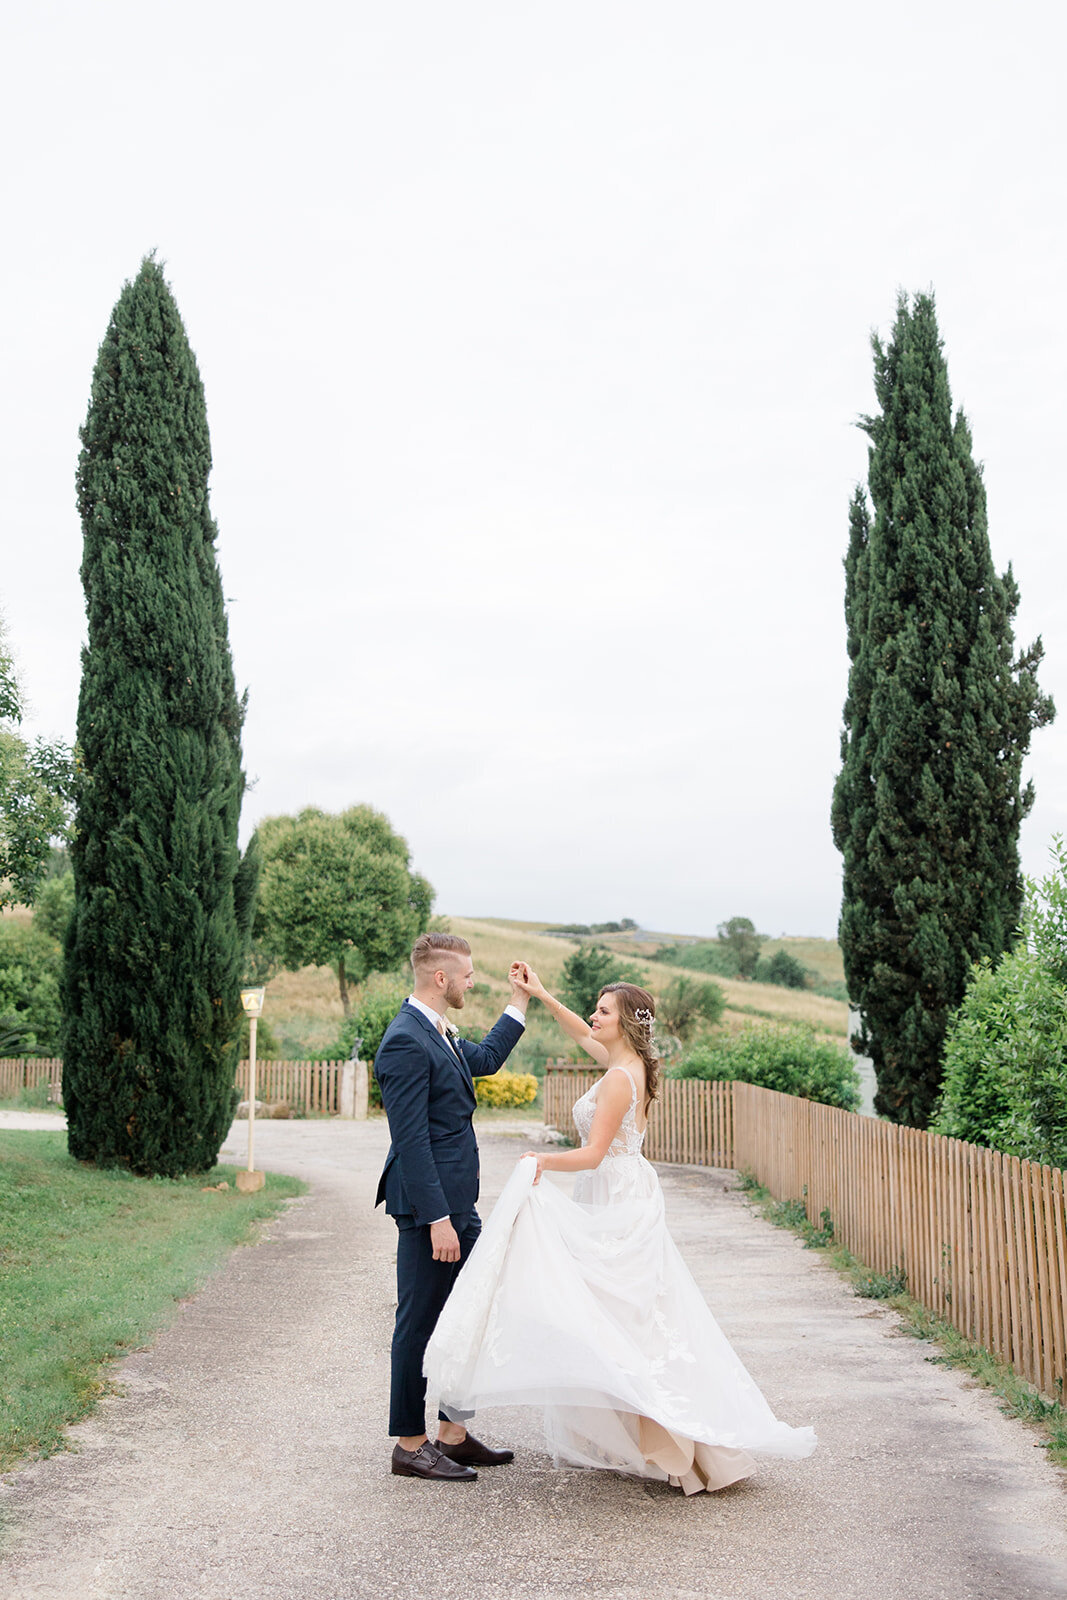 Rome_Italy_Wedding_BrittanyNavinPhotography-776